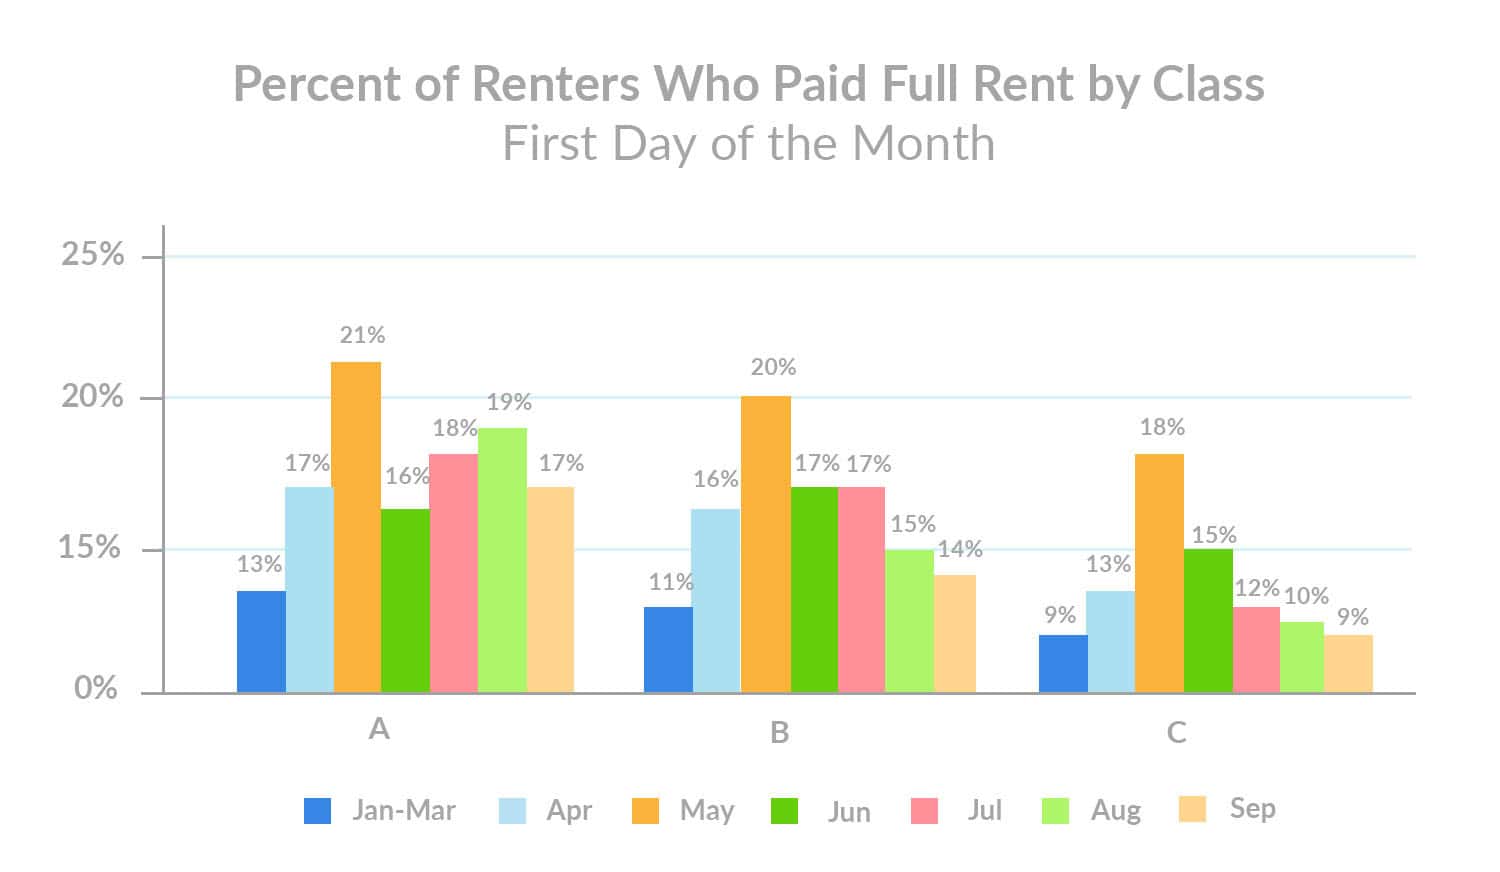 Percent of Renters Who Paid Full Rent by Class September 1st Rent Payments